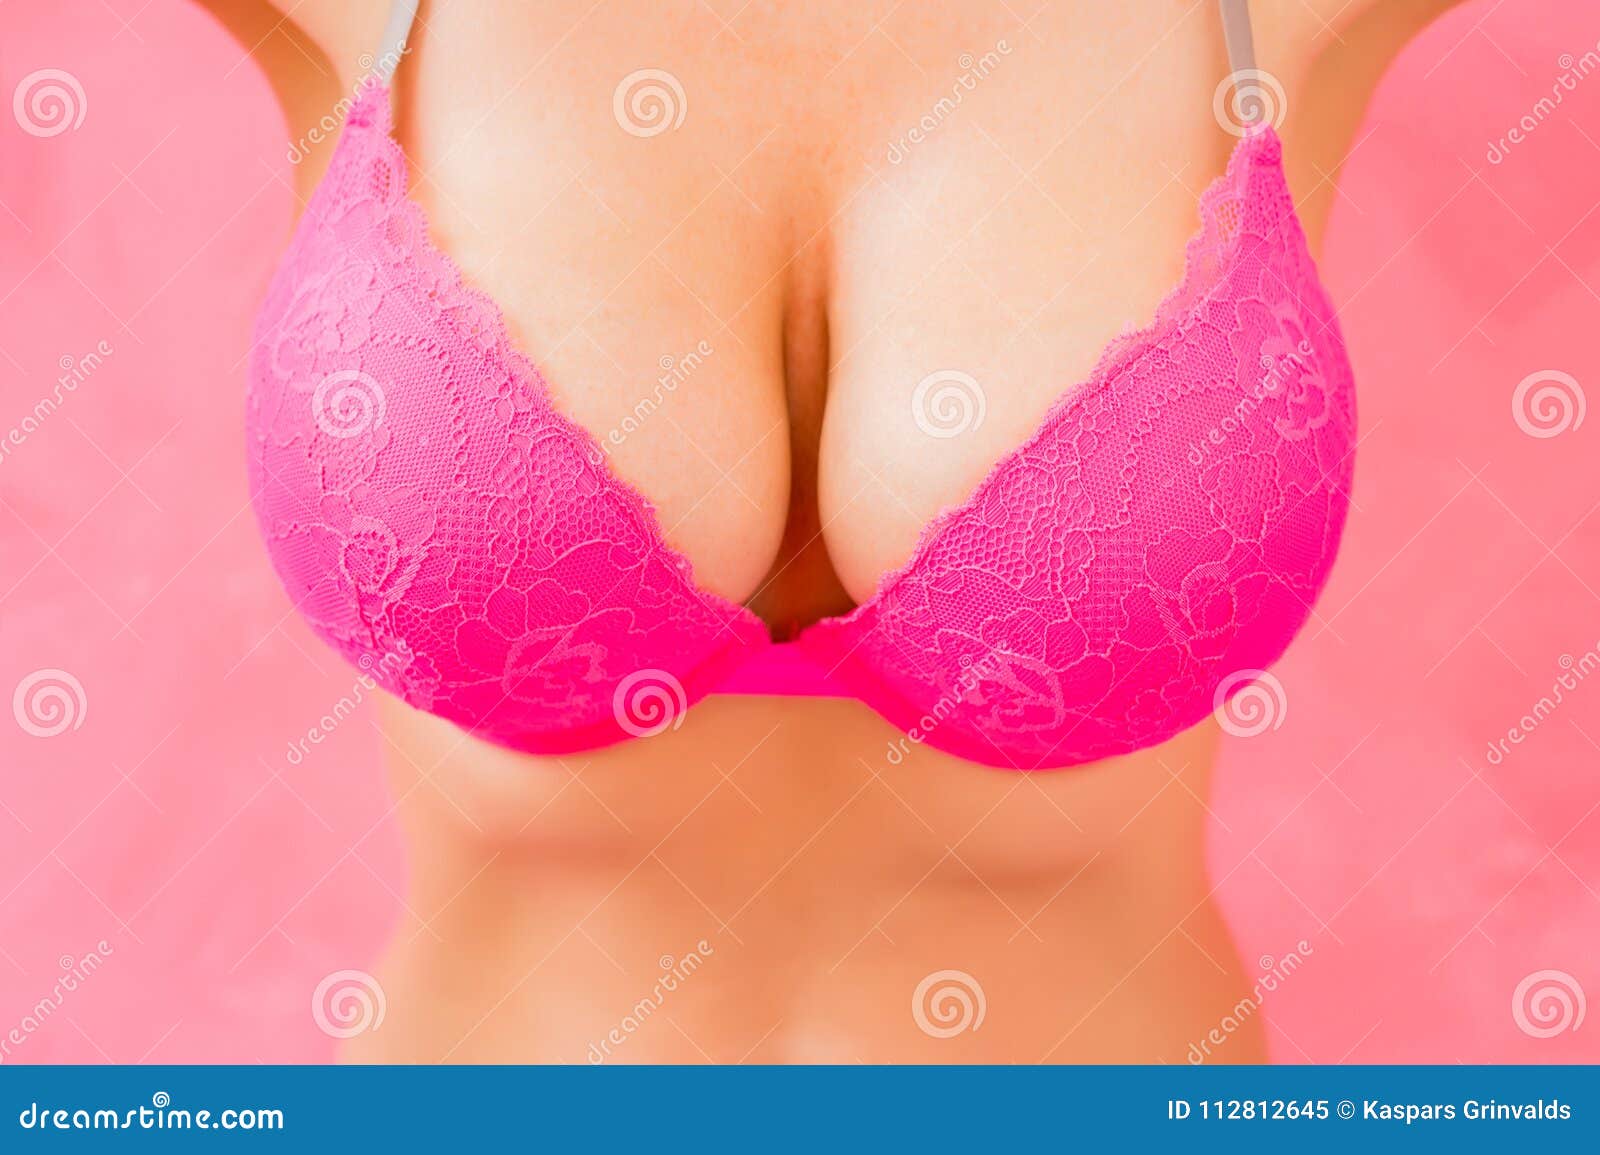 Woman posing in support bra after breast augmentation plastic surgery with  silicone breast implants. Stock Photo